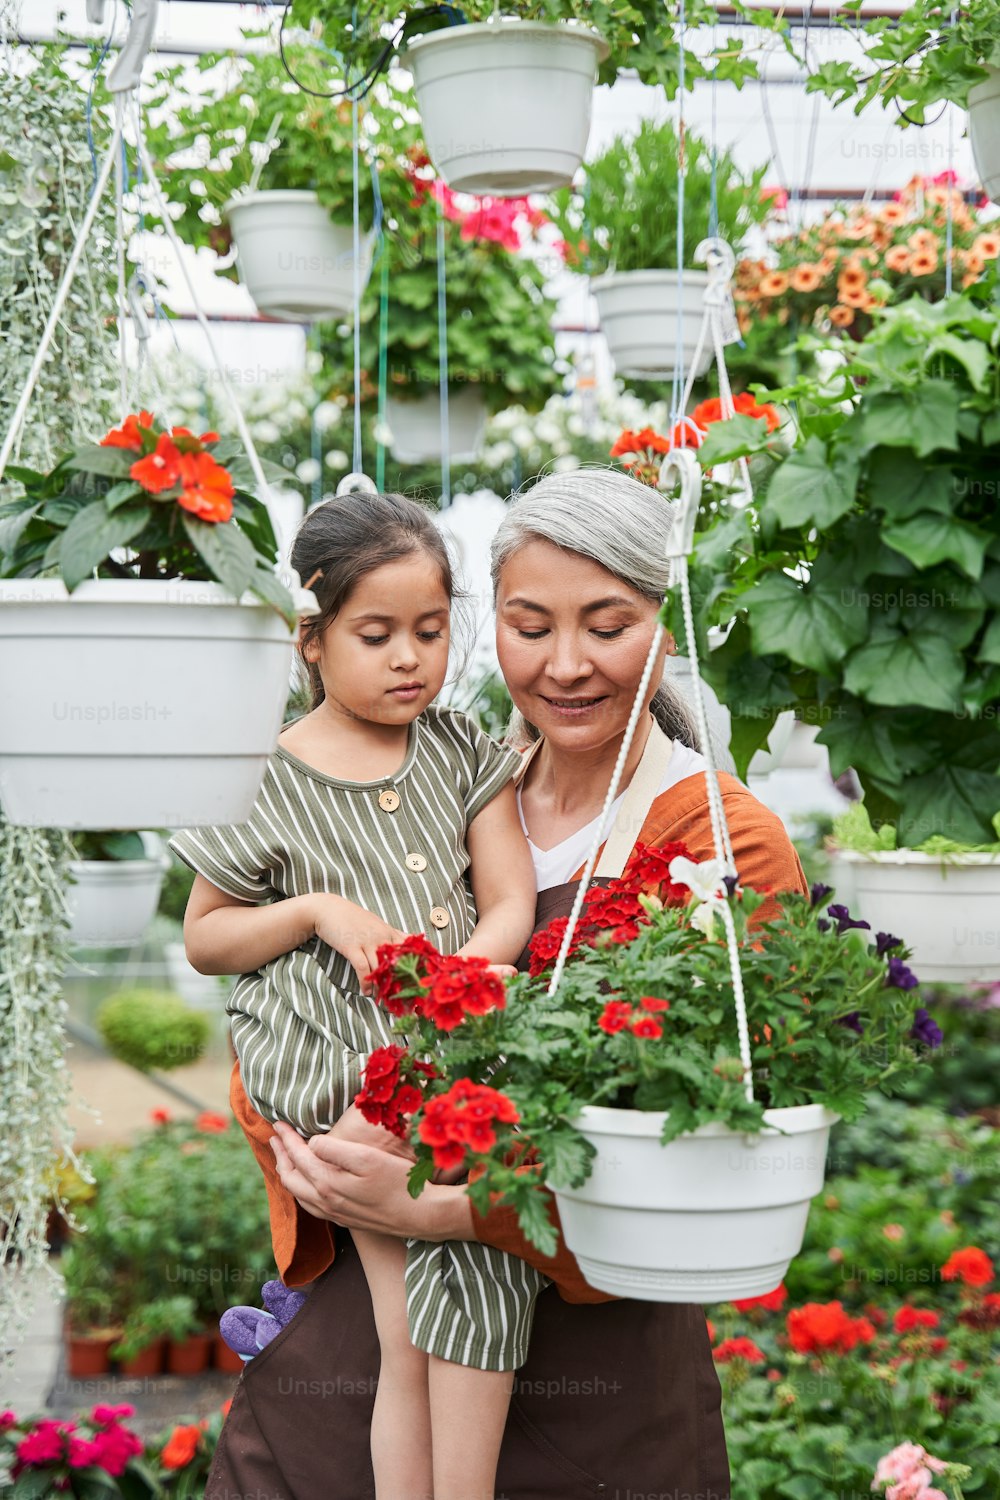 Waist up portrait view of the senior lady embracing her little granddaughter and telling something to her while spending time at the greenhouse. Stock photo